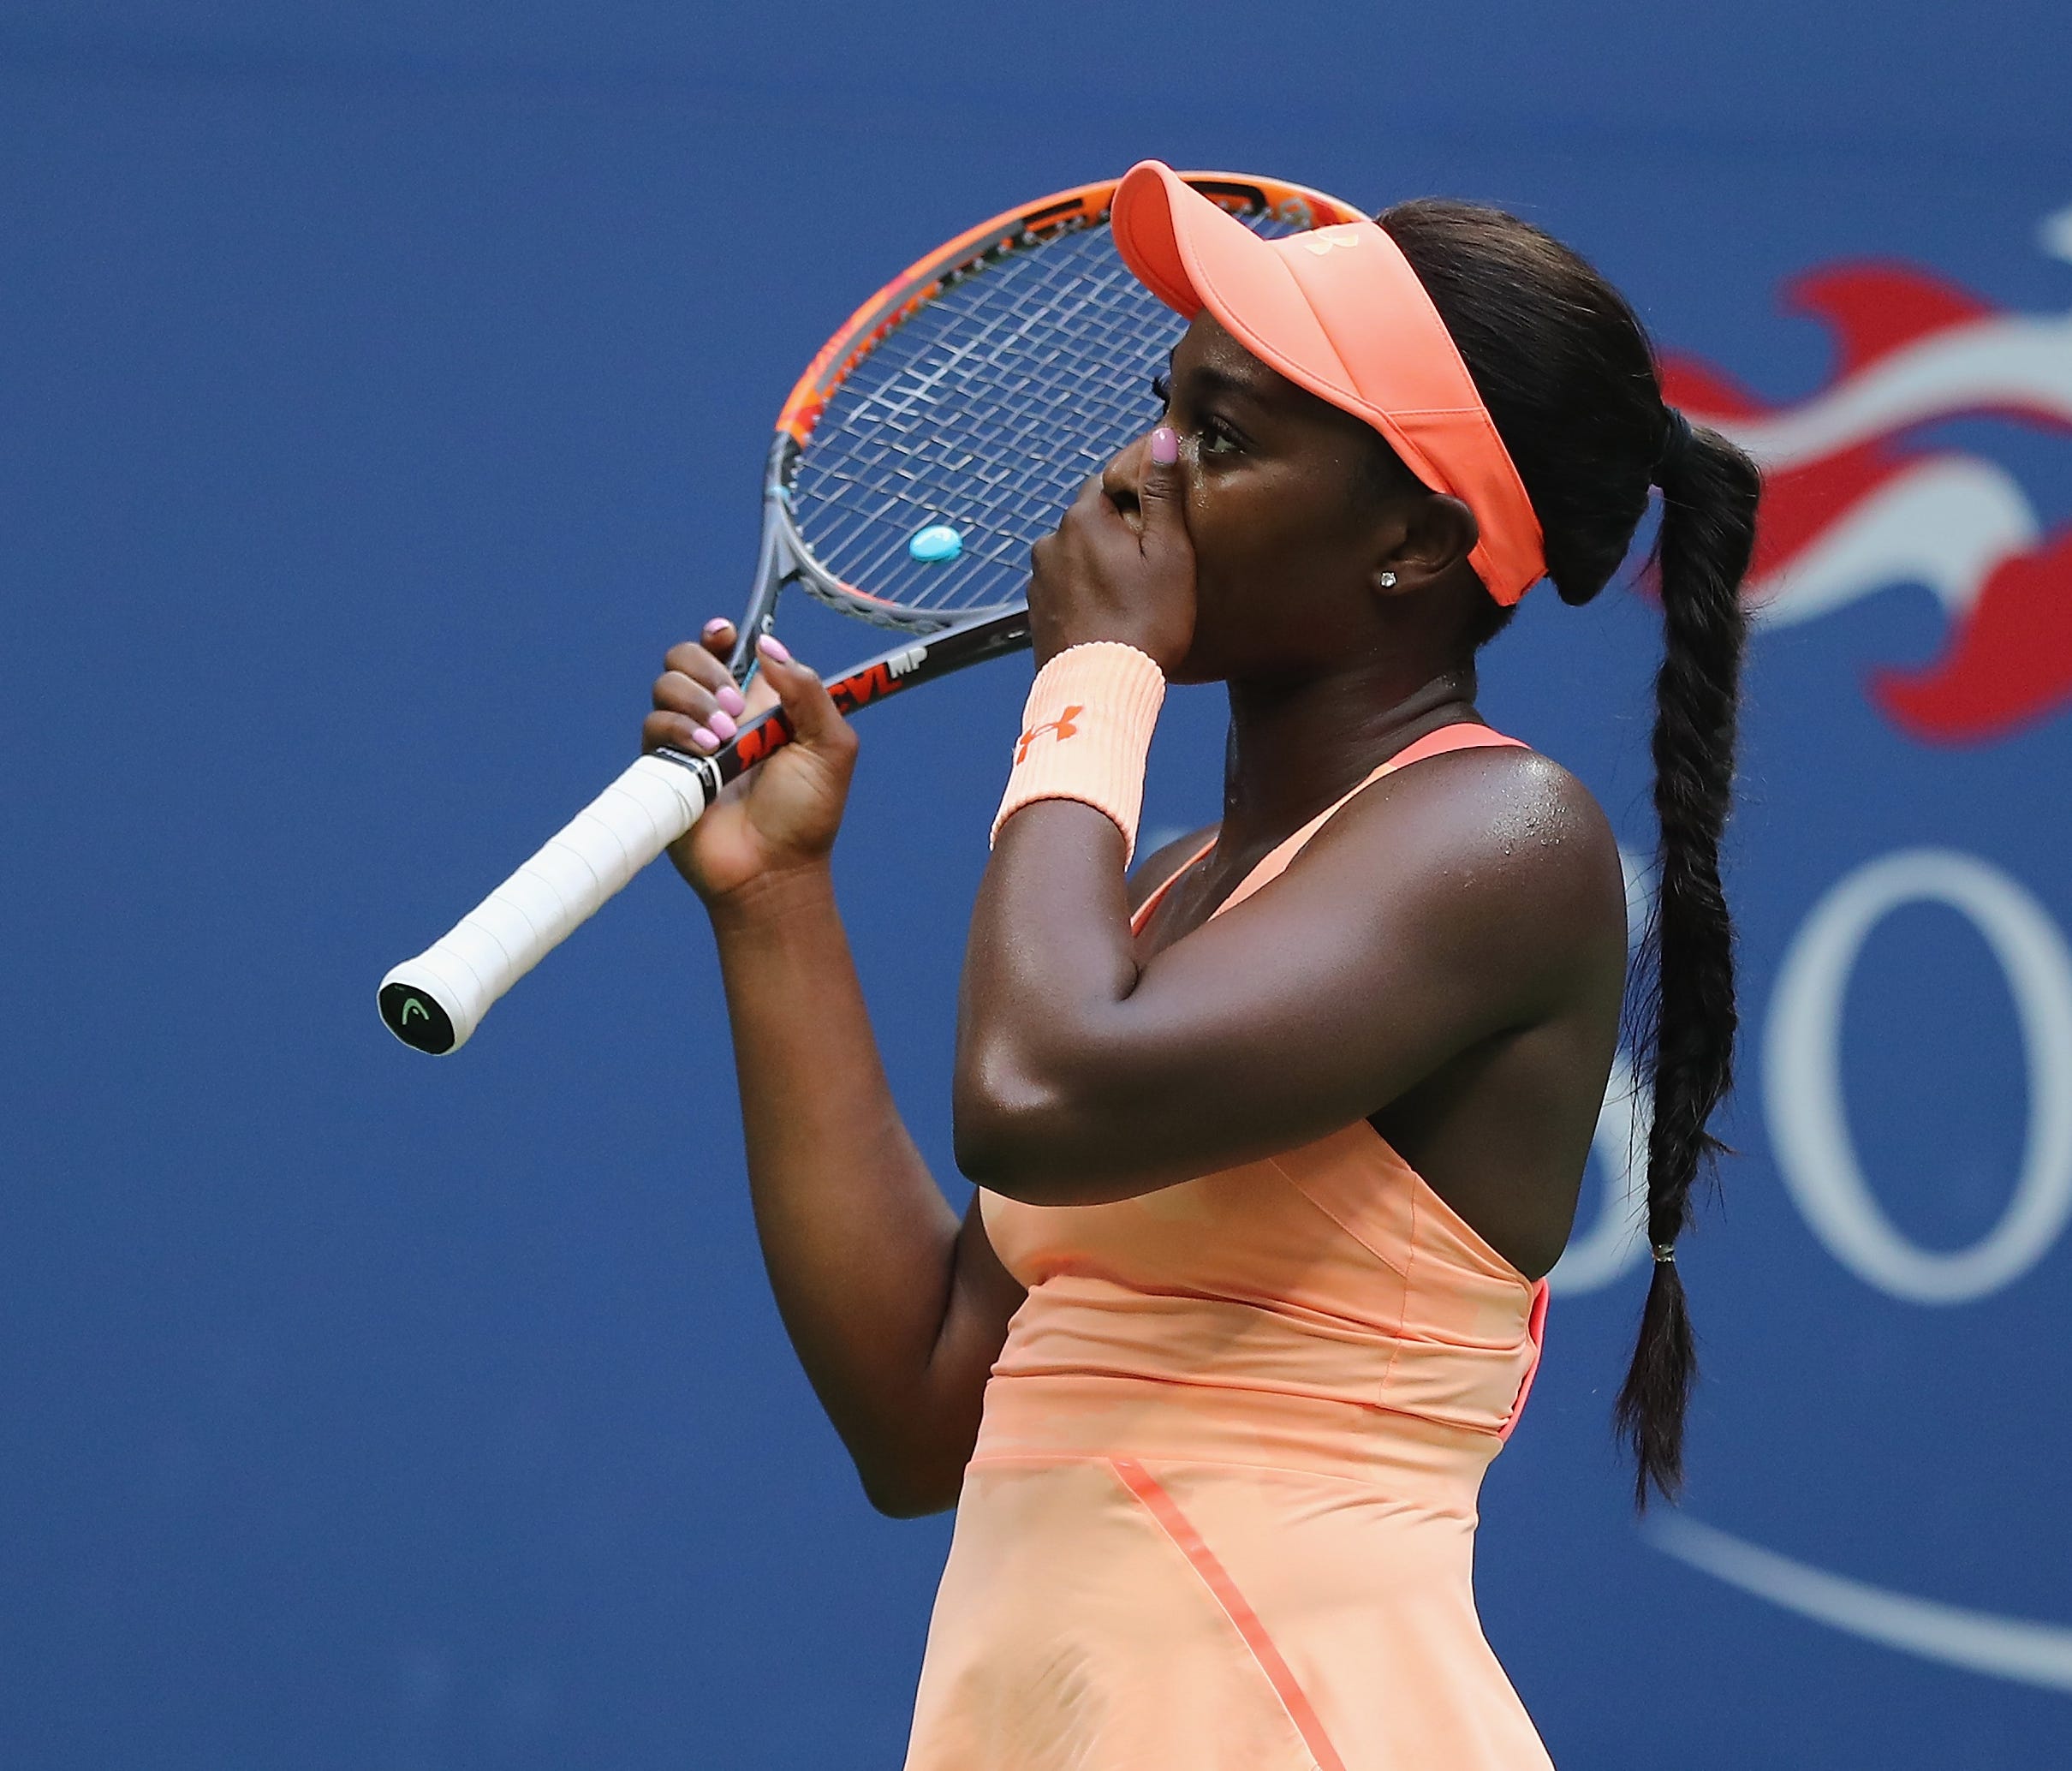 Sloane Stephens celebrates defeating Madison Keys after their women's singles finals match during the 2017 US Open at the USTA Billie Jean King National Tennis Center on Sept. 9.